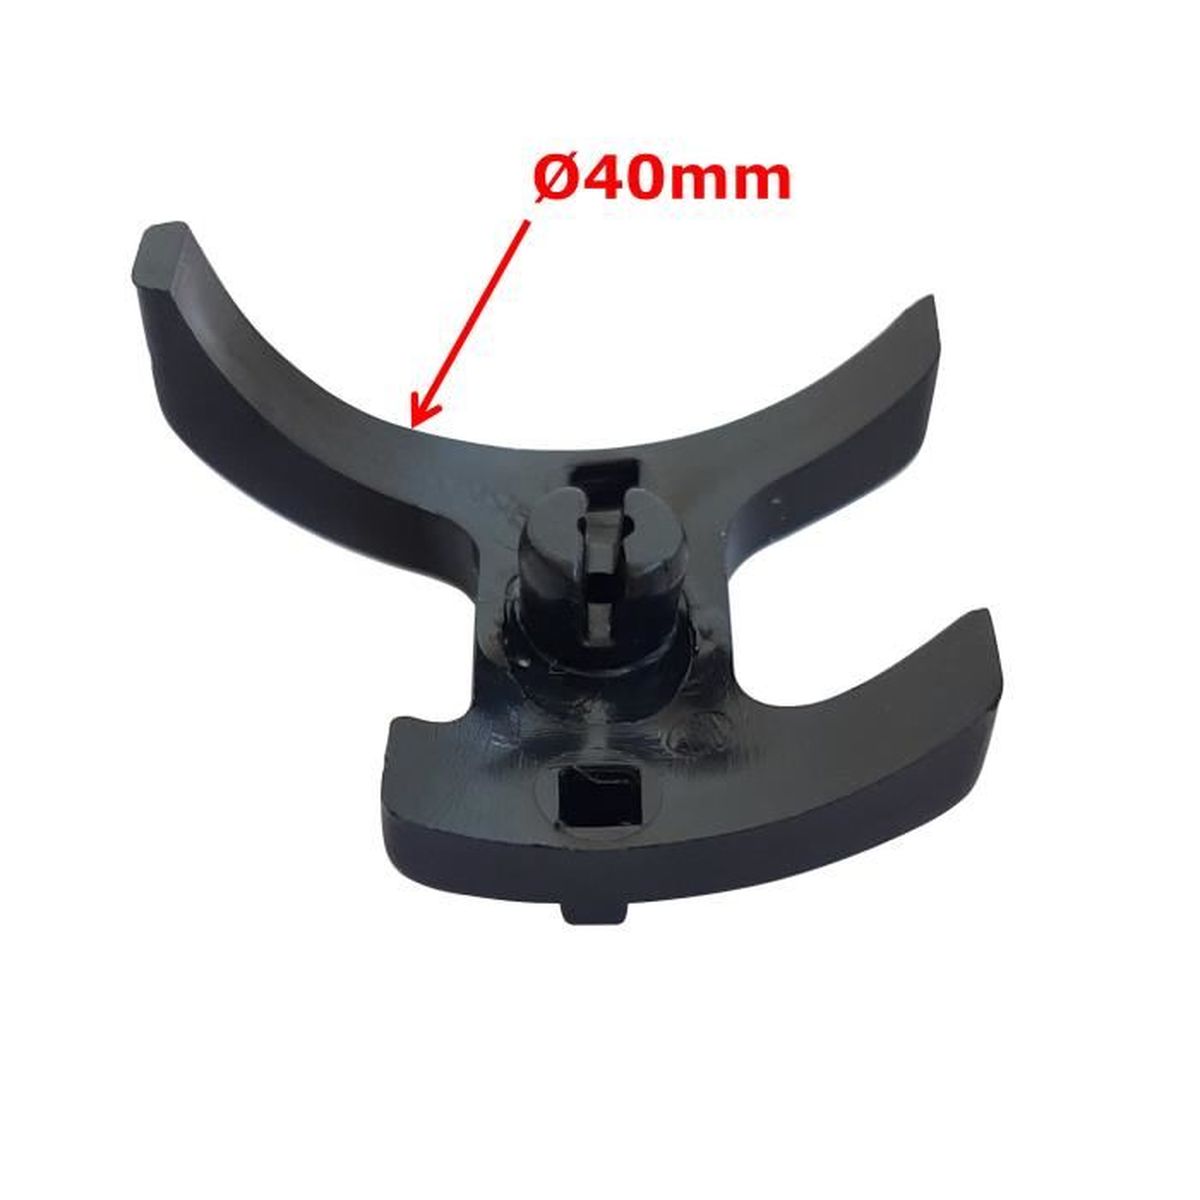 GUIDE CABLE PASSAGE SUPPORT CADRE BOITIER PEDALIER 40MM 55MM VELO VTT ROUTE VTC